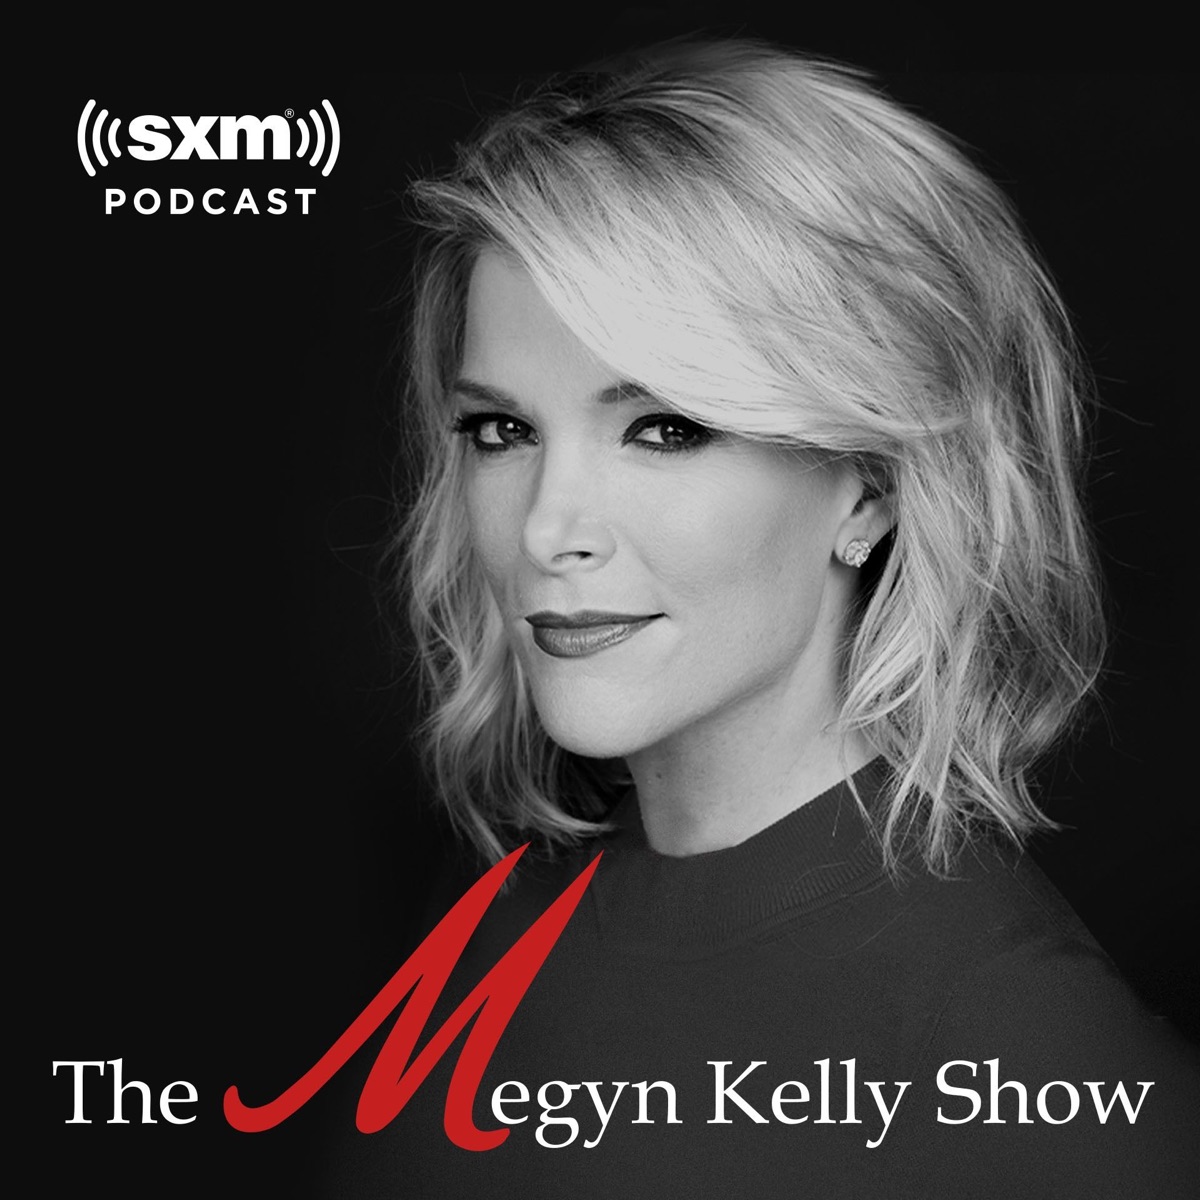 The Megyn Kelly Show – Podcast